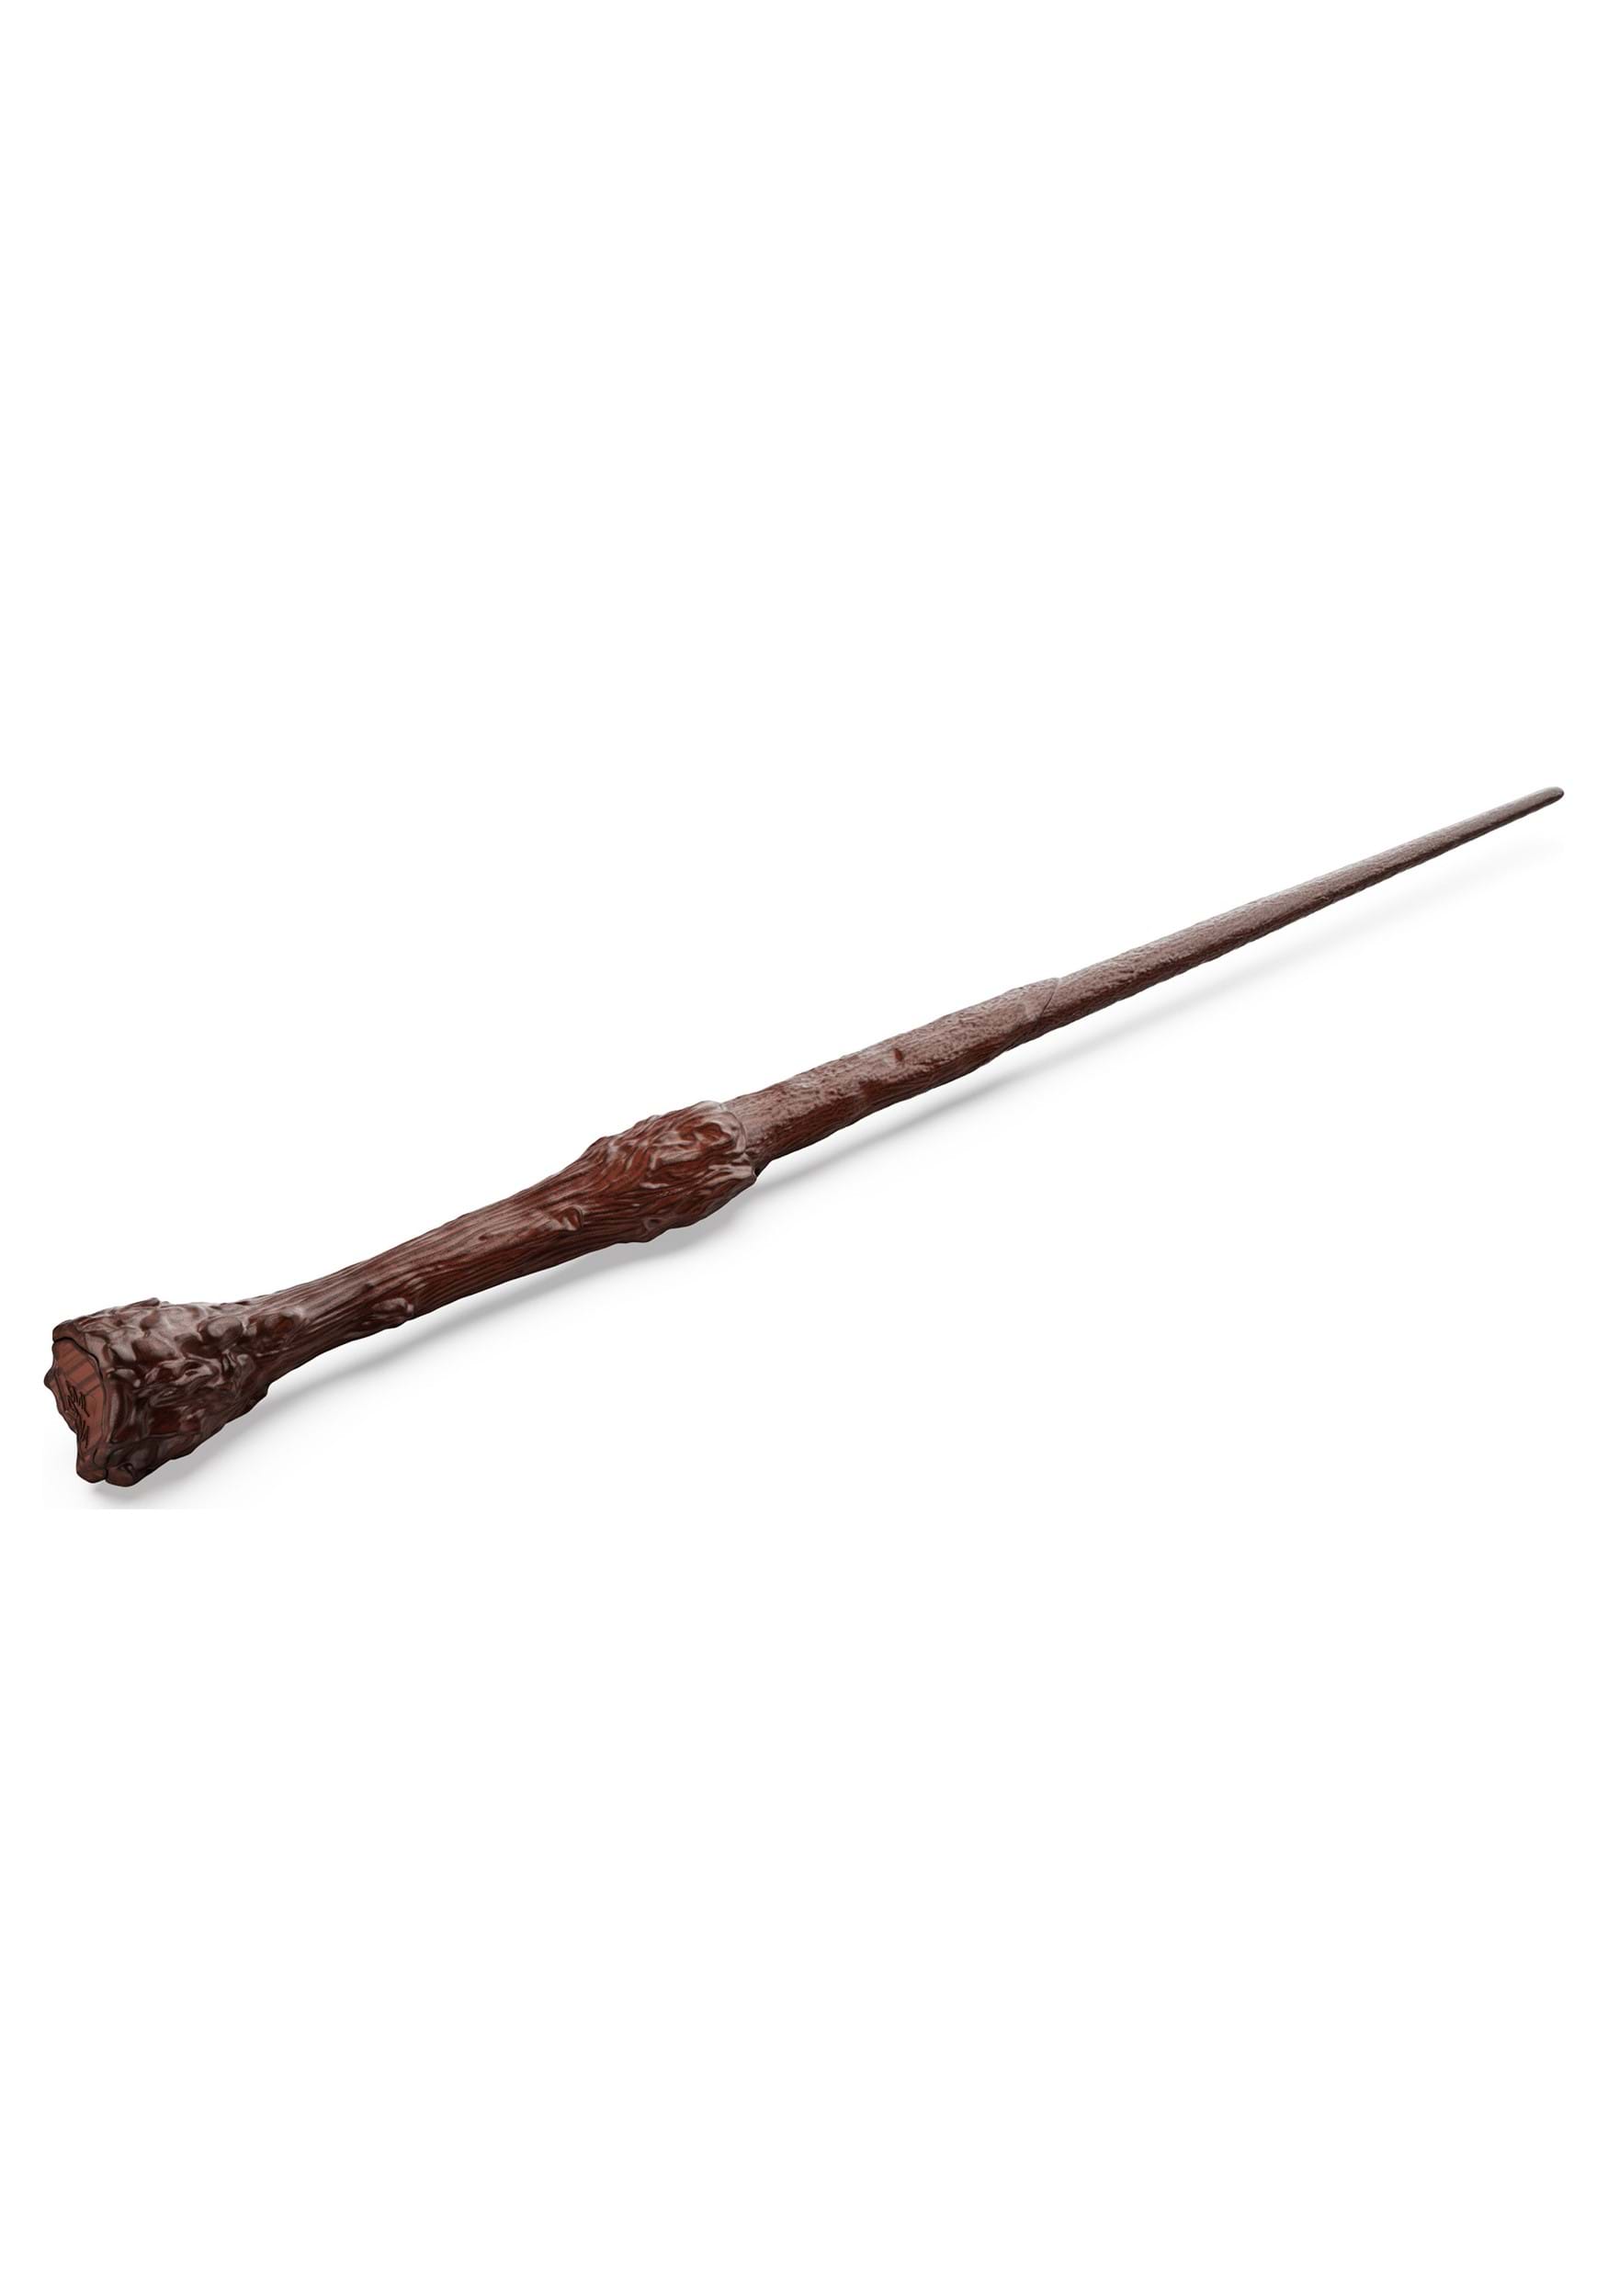 Wizarding World SpellBinding Harry Potter Wand Multicolor Colombia